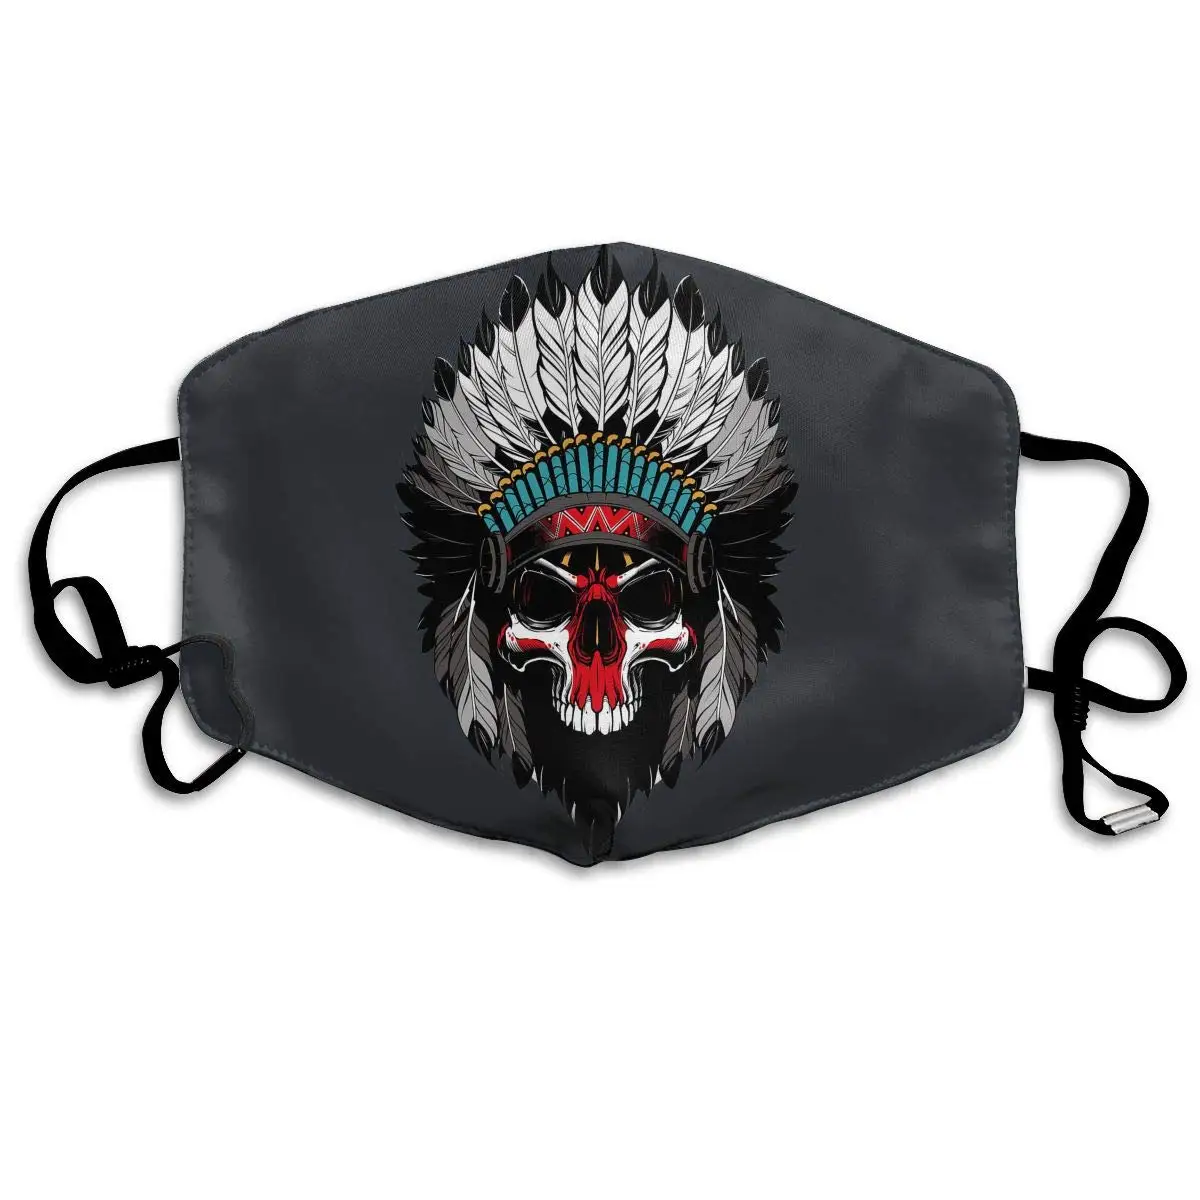 

Custom Dustproof Mouth Mask Indian Skull Reusable Outdoor Unisex Face Mask with Adjustable Earloops